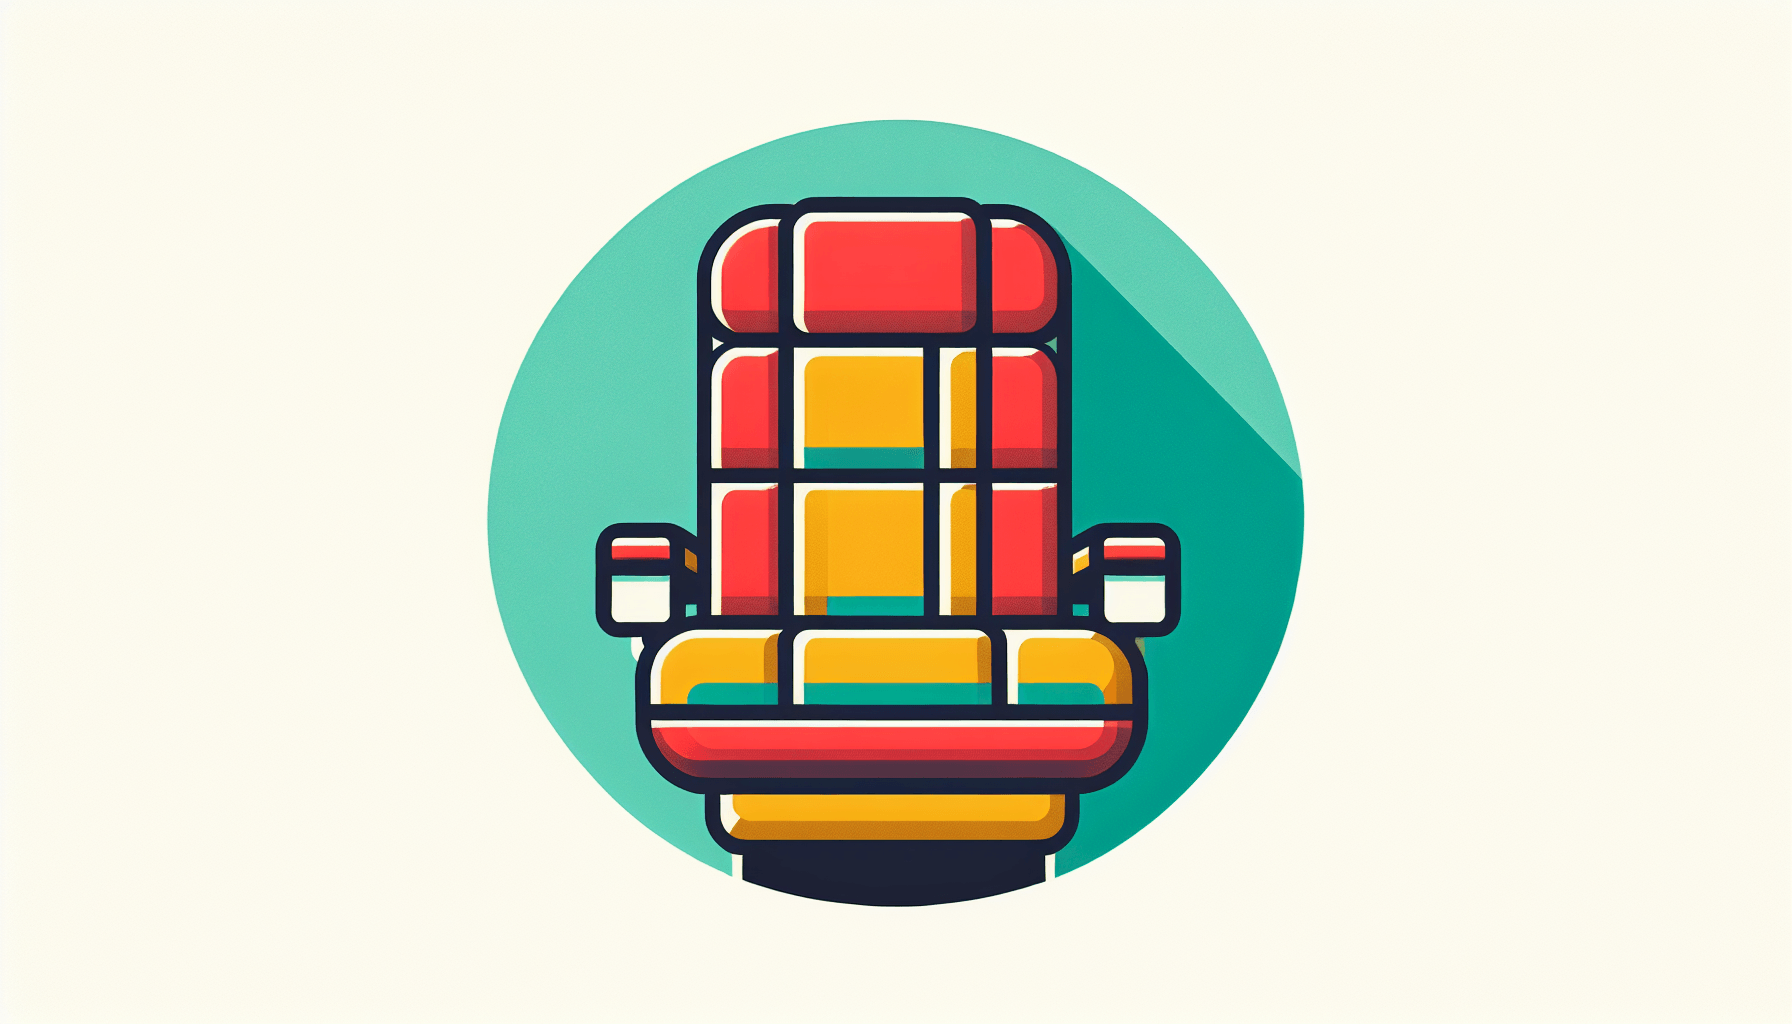 Airplane seat in flat illustration style and white background, red #f47574, green #88c7a8, yellow #fcc44b, and blue #645bc8 colors.